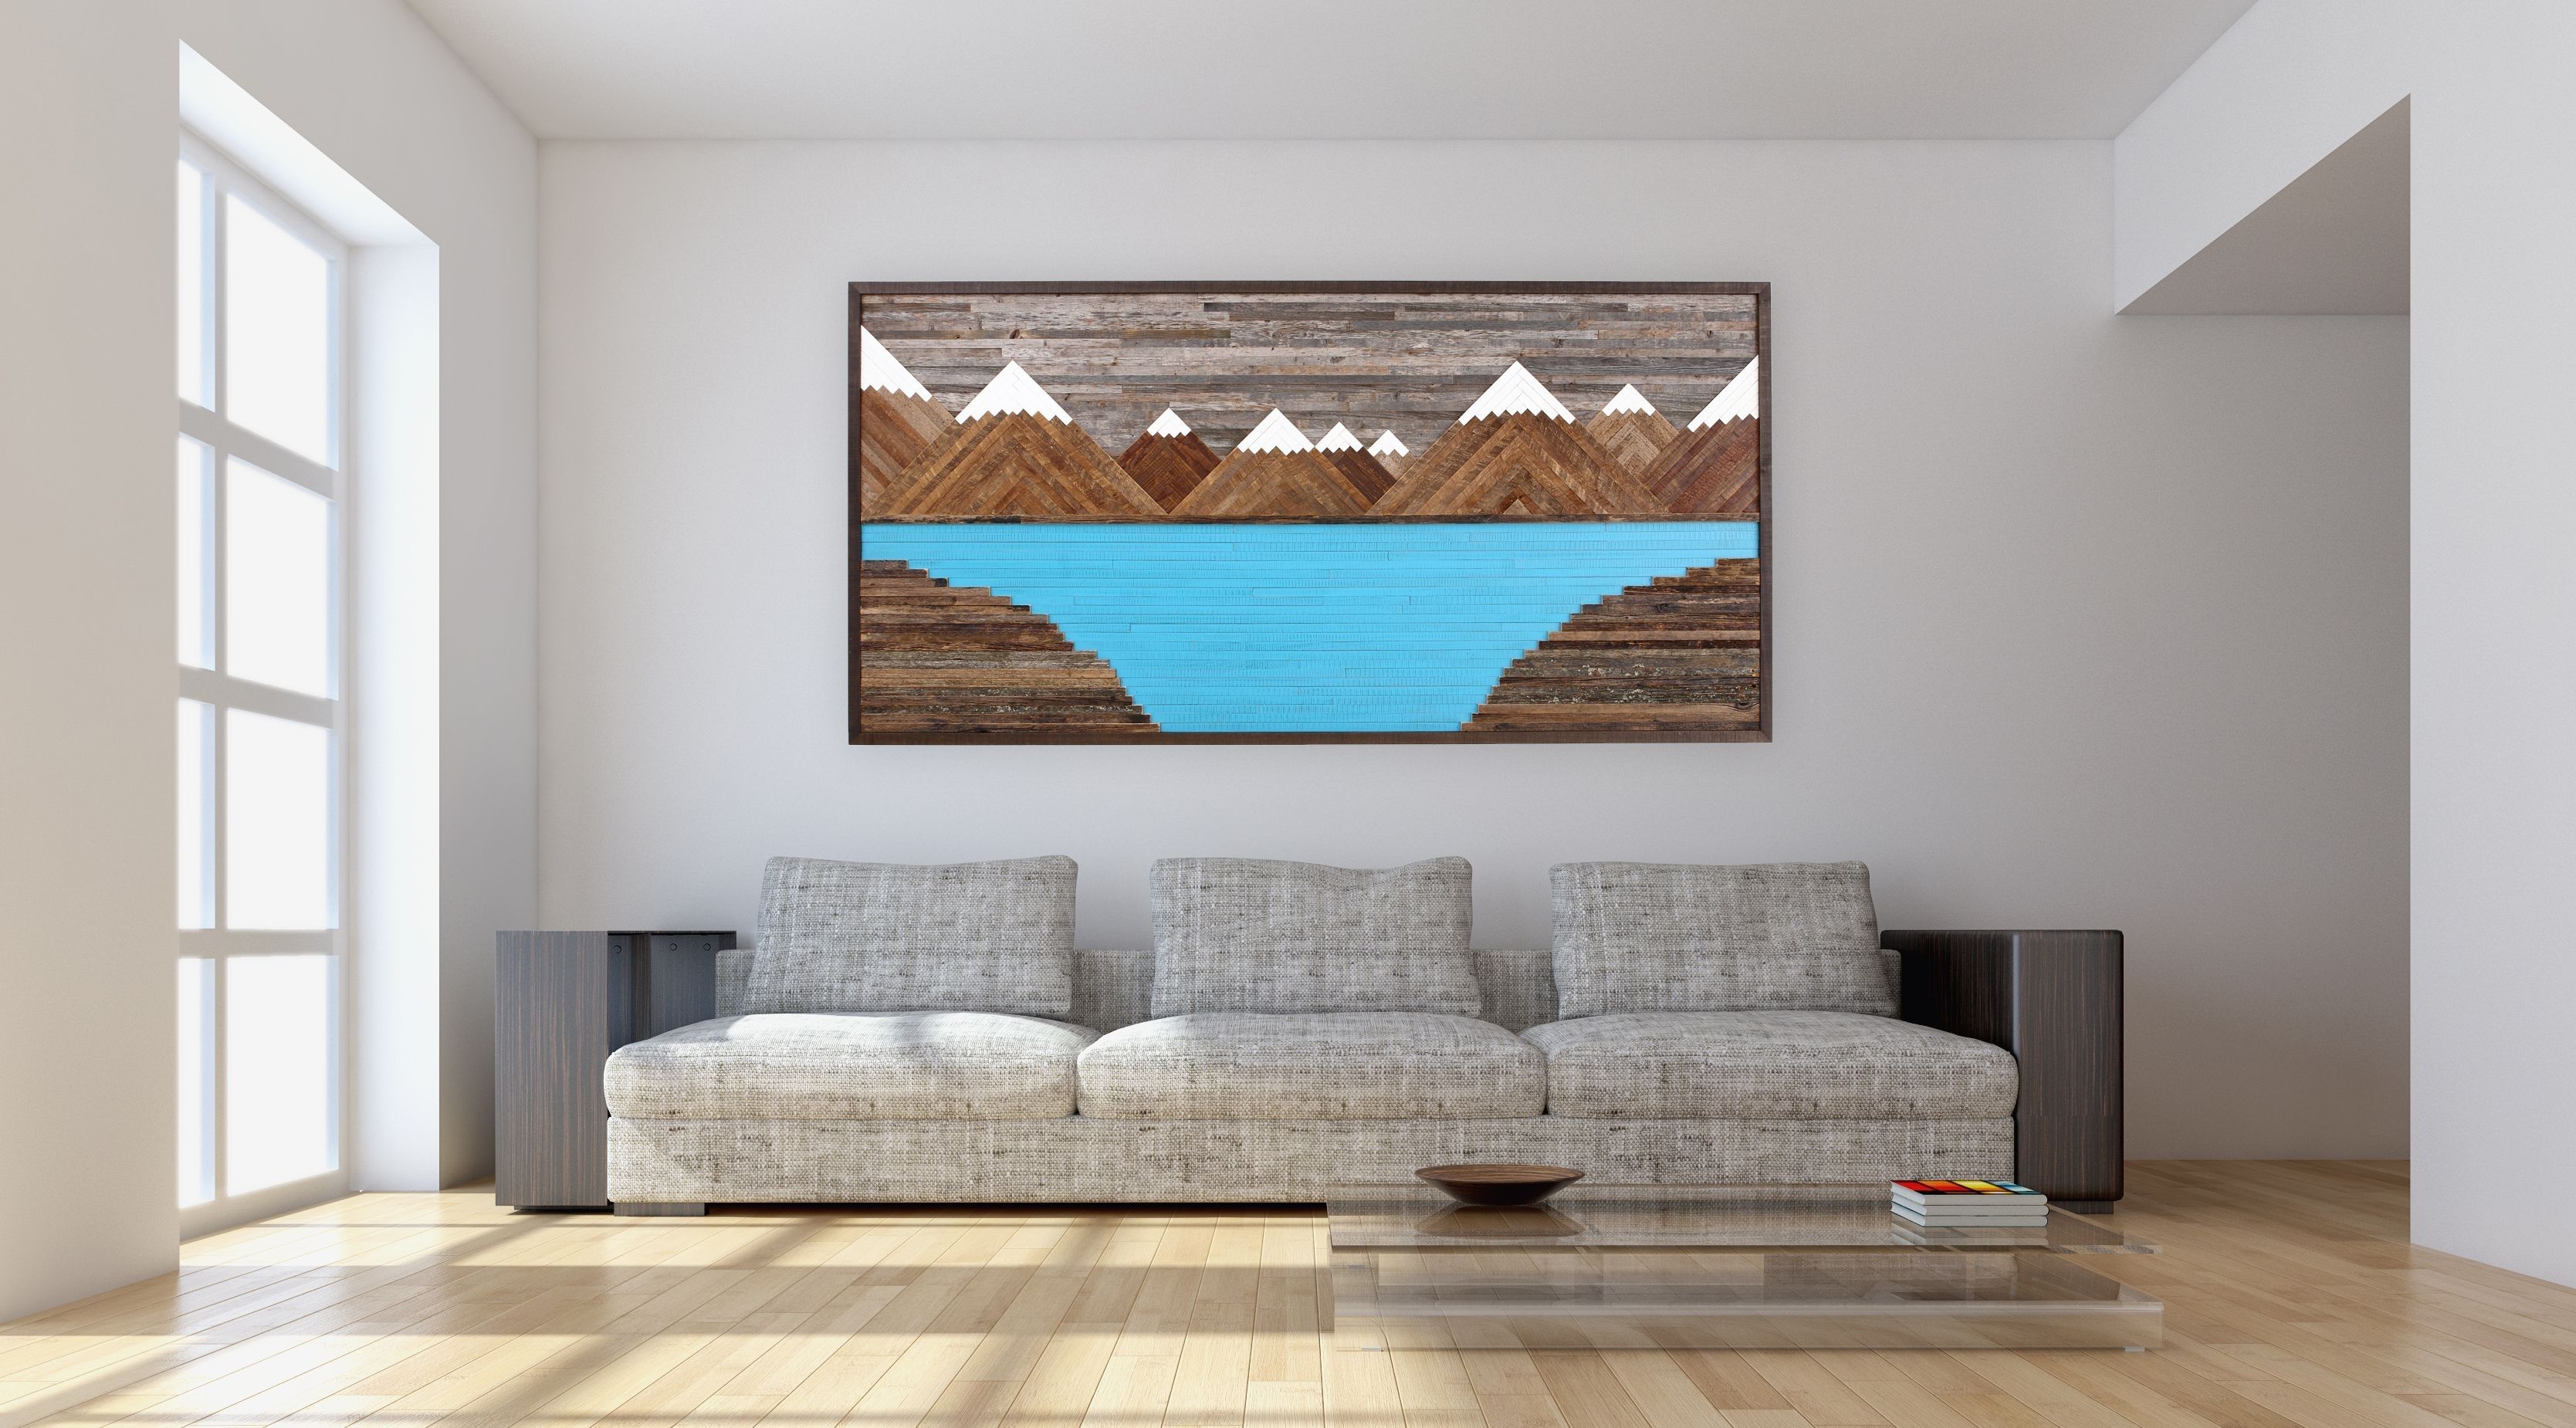 Handmade Glacier Mountain Landscape, Wood Wall Art, Reclaimed Wood With Regard To Wood Art Wall (View 13 of 20)